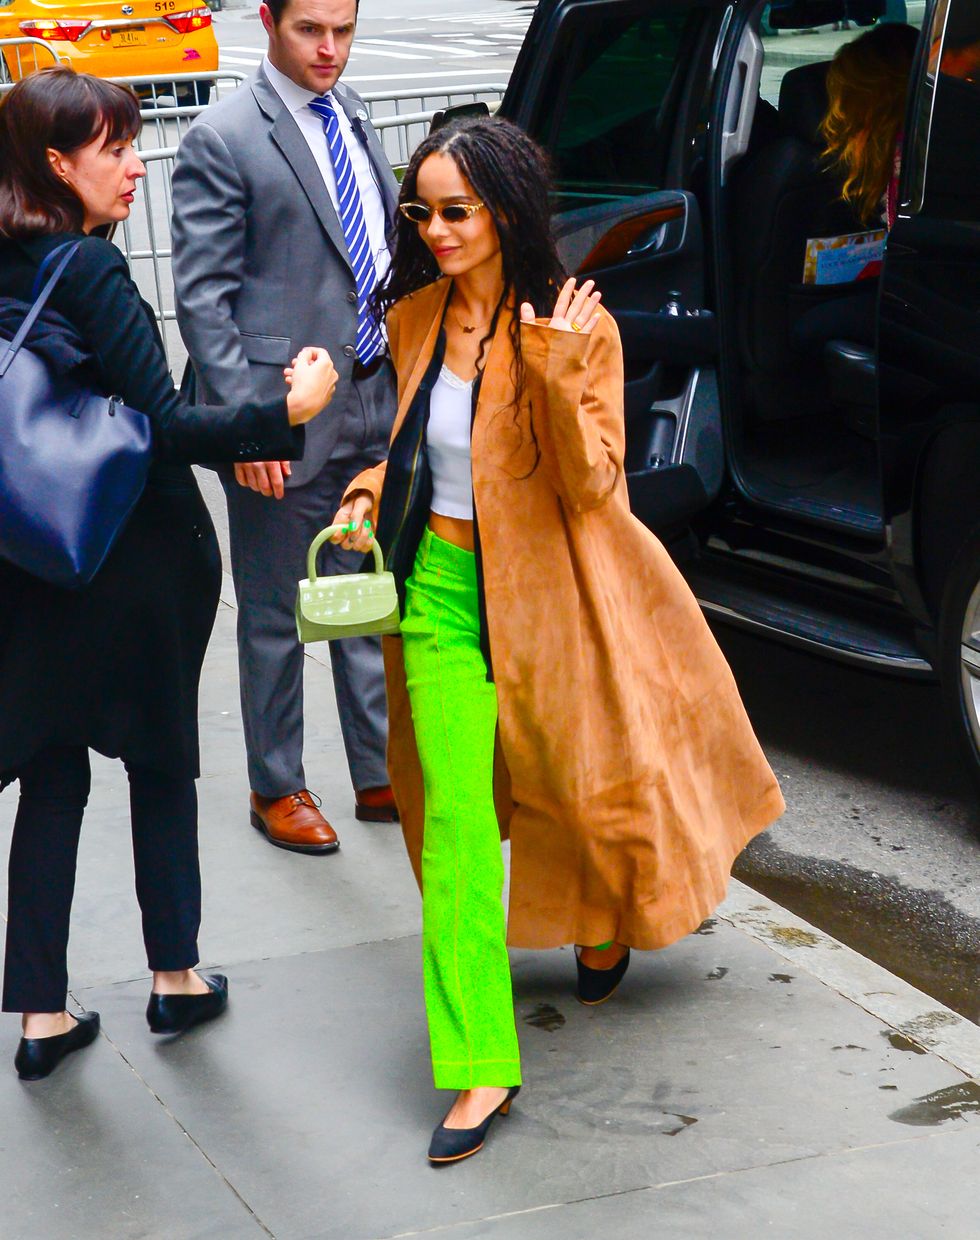 celebrity sightings in new york city may 01, 2019